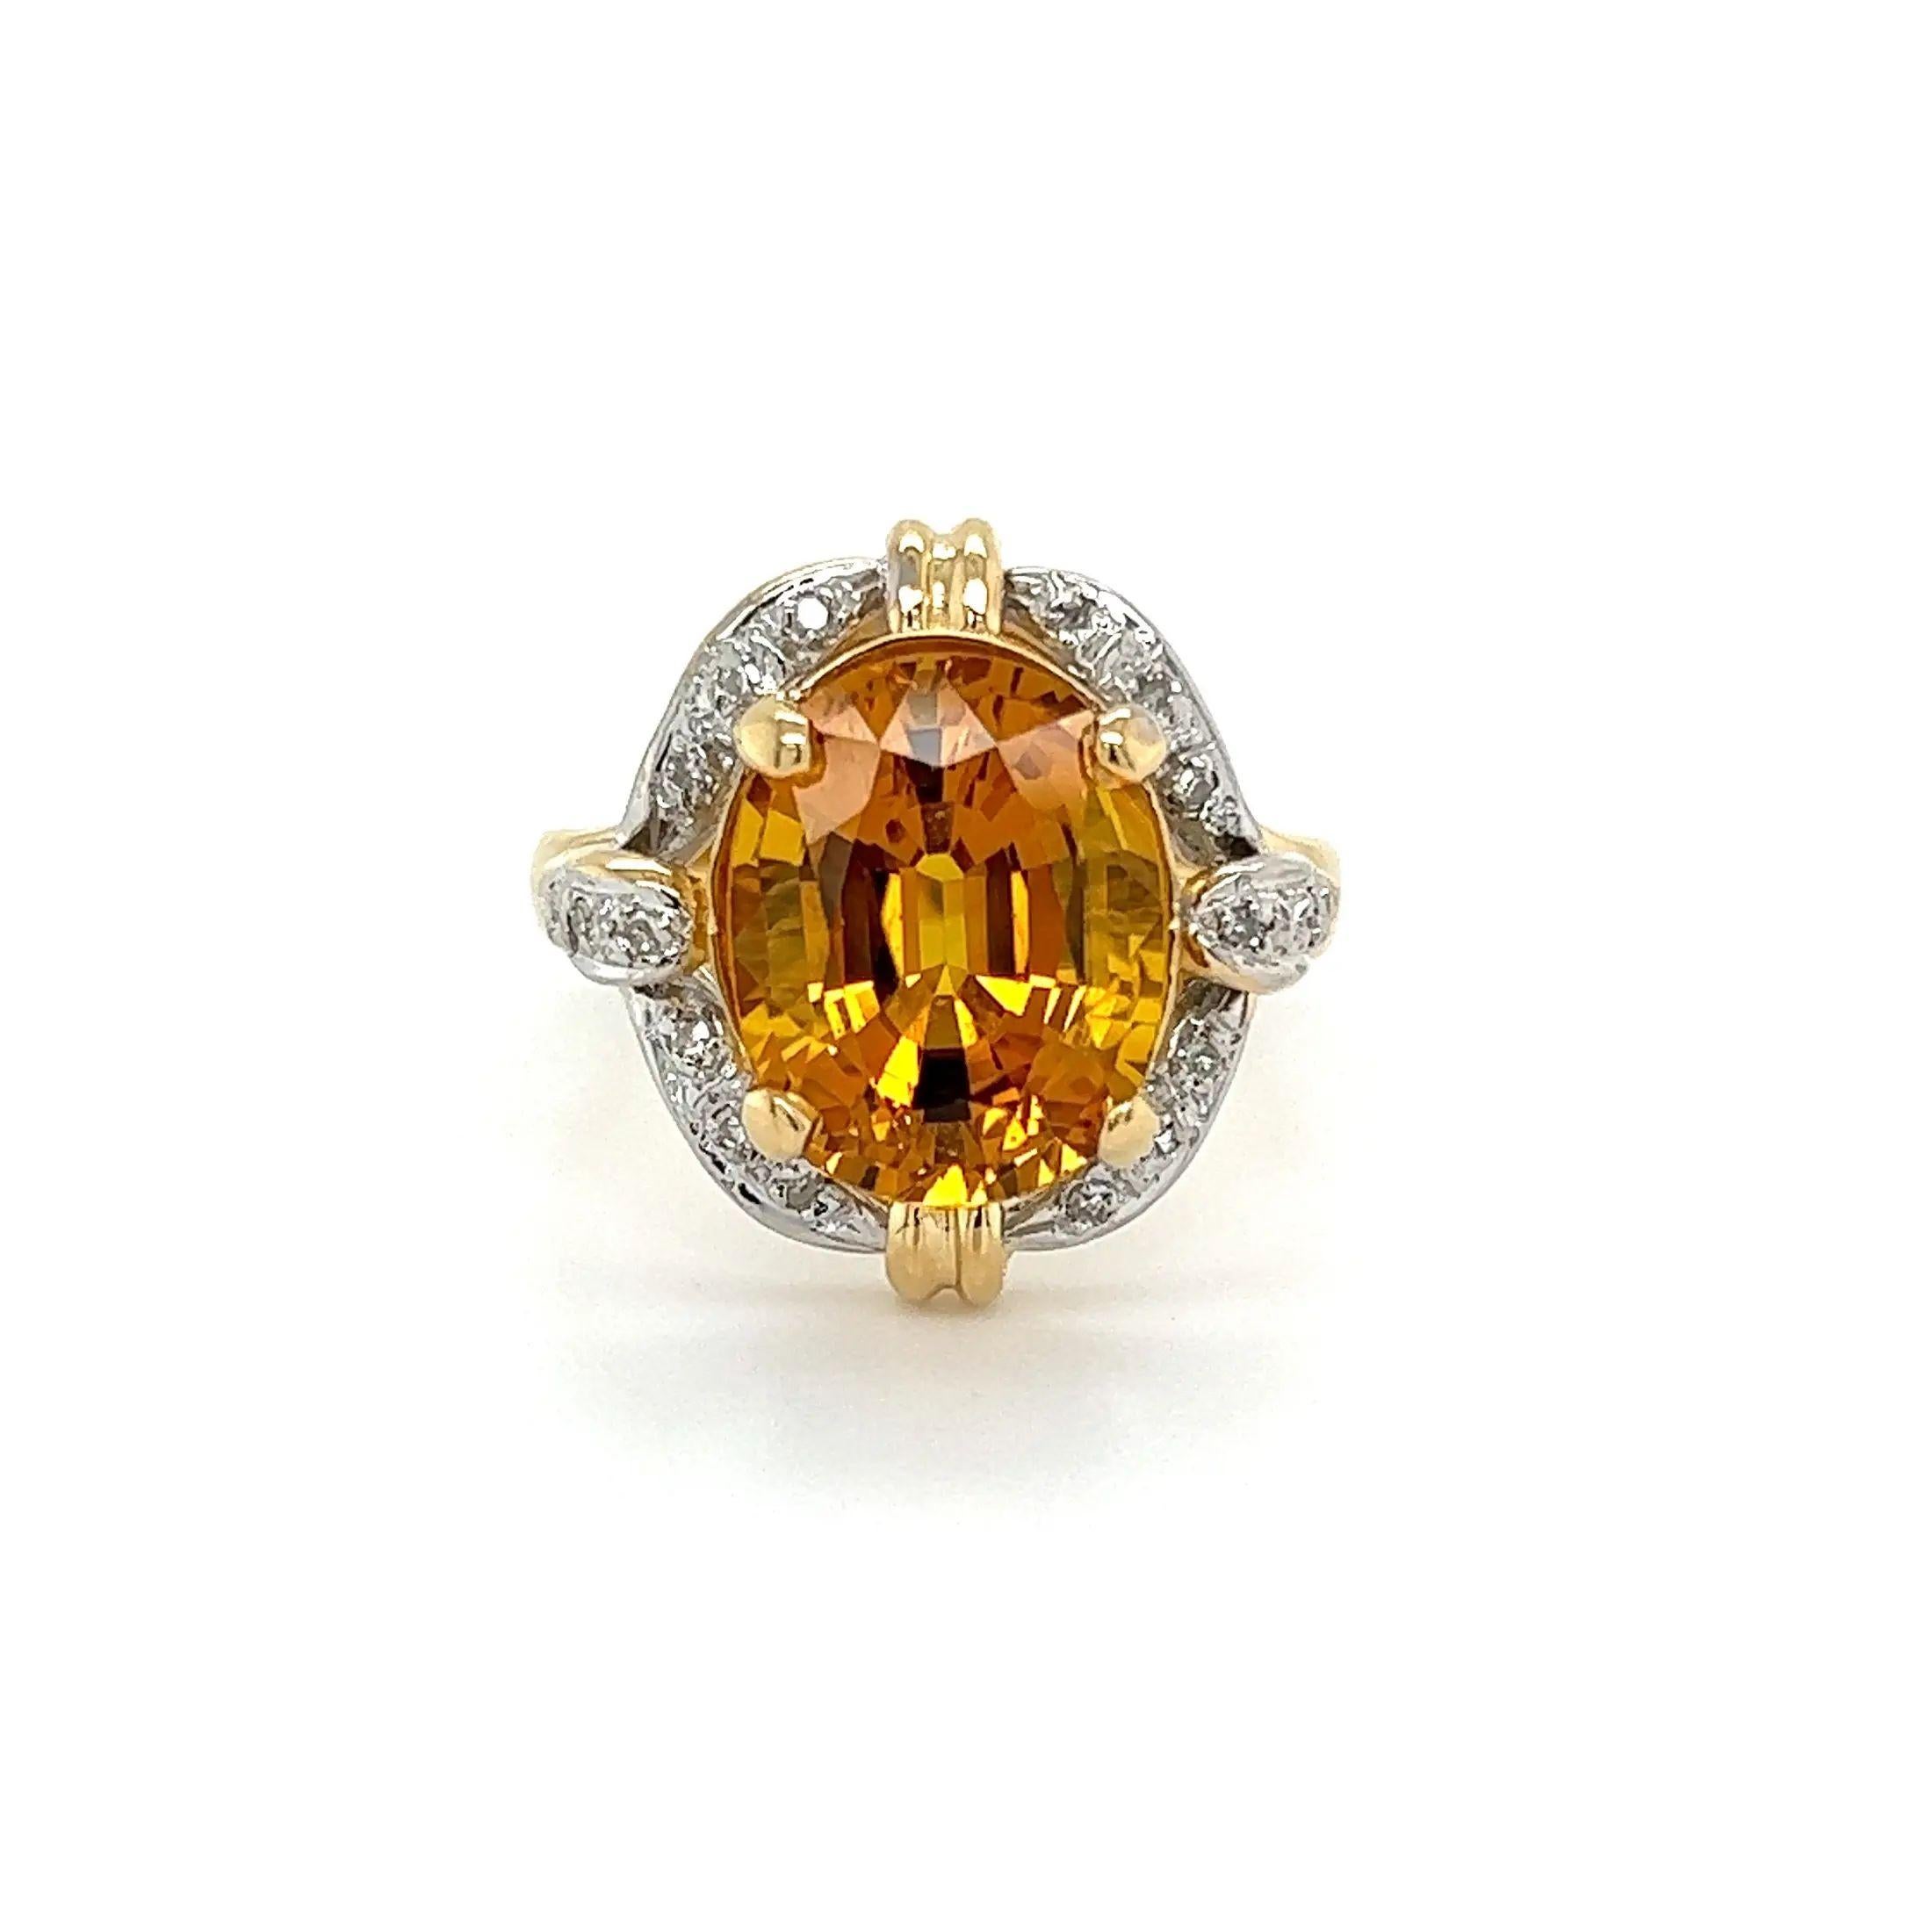 Mixed Cut Vintage 6.92 Carat Vivid Orange Yellow Sapphire and Diamond Ring For Sale